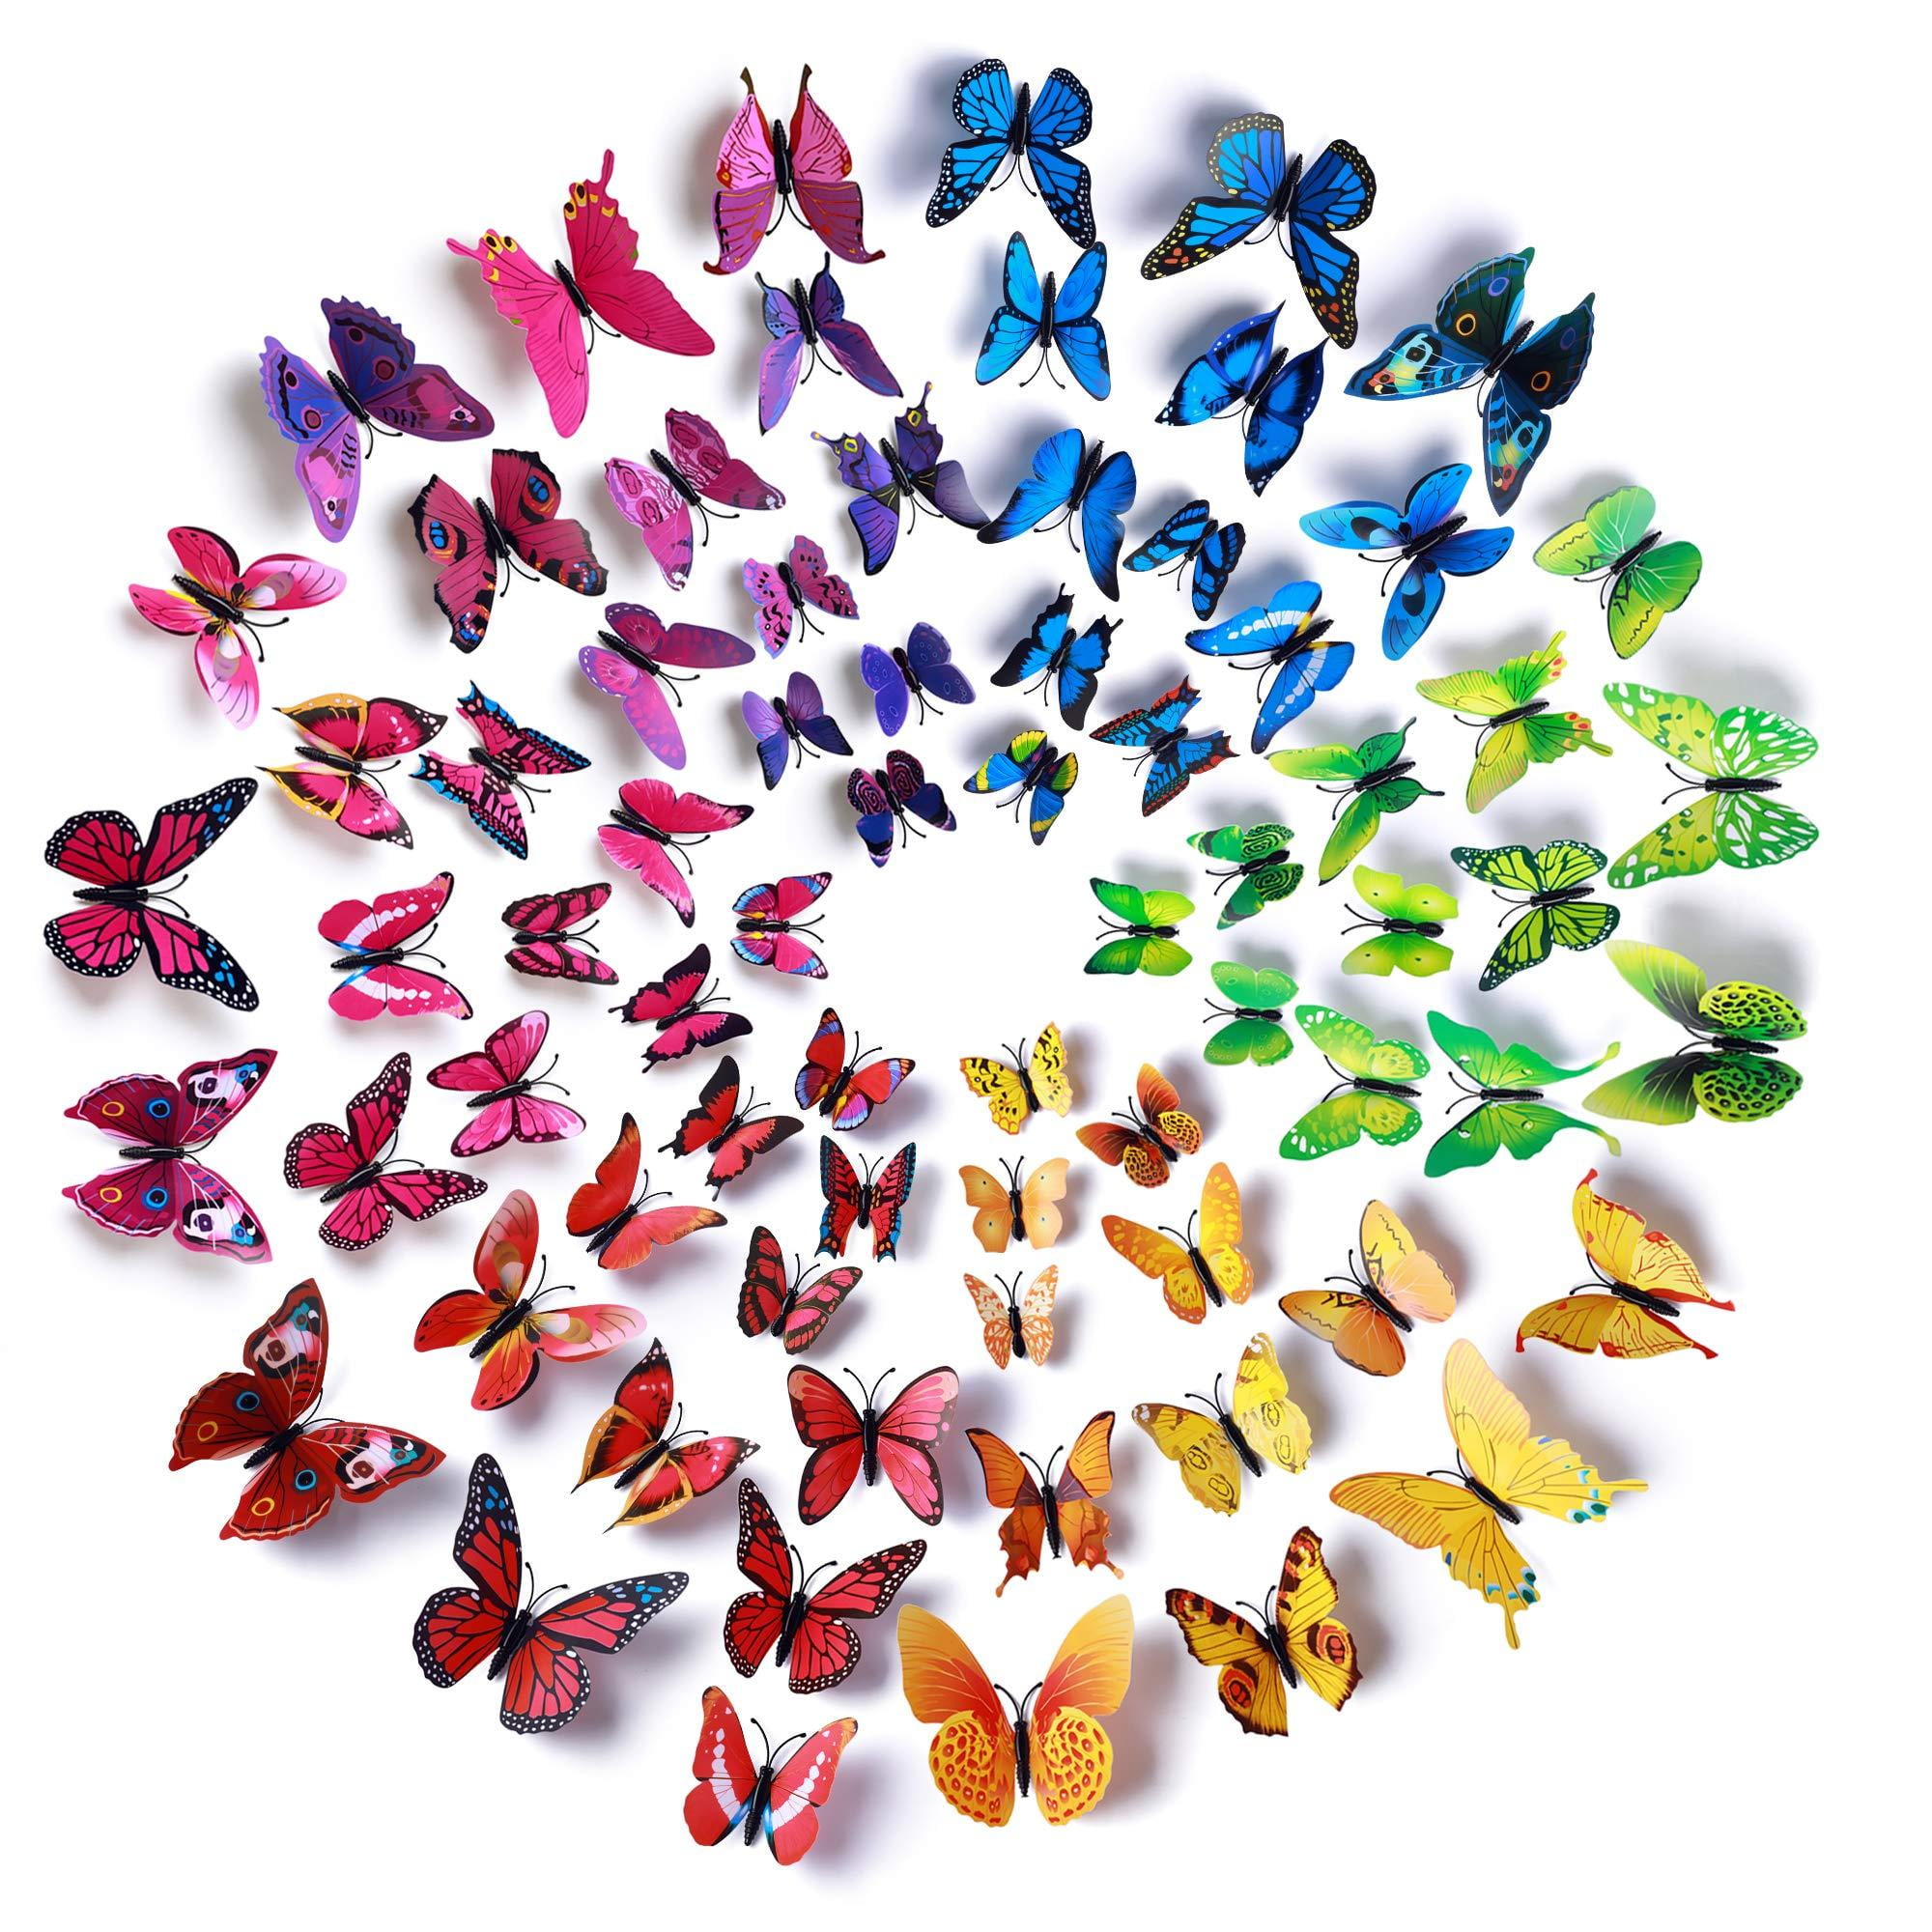 Amaonm 72 Pcs 6 Packages Beautiful 3D Butterfly Wall Decals Removable DIY  Home Decorations Art Decor Wall Stickers & Murals for Babys Bedroom Tv  Background Living Room (Colorful, Six Color) Colorful 